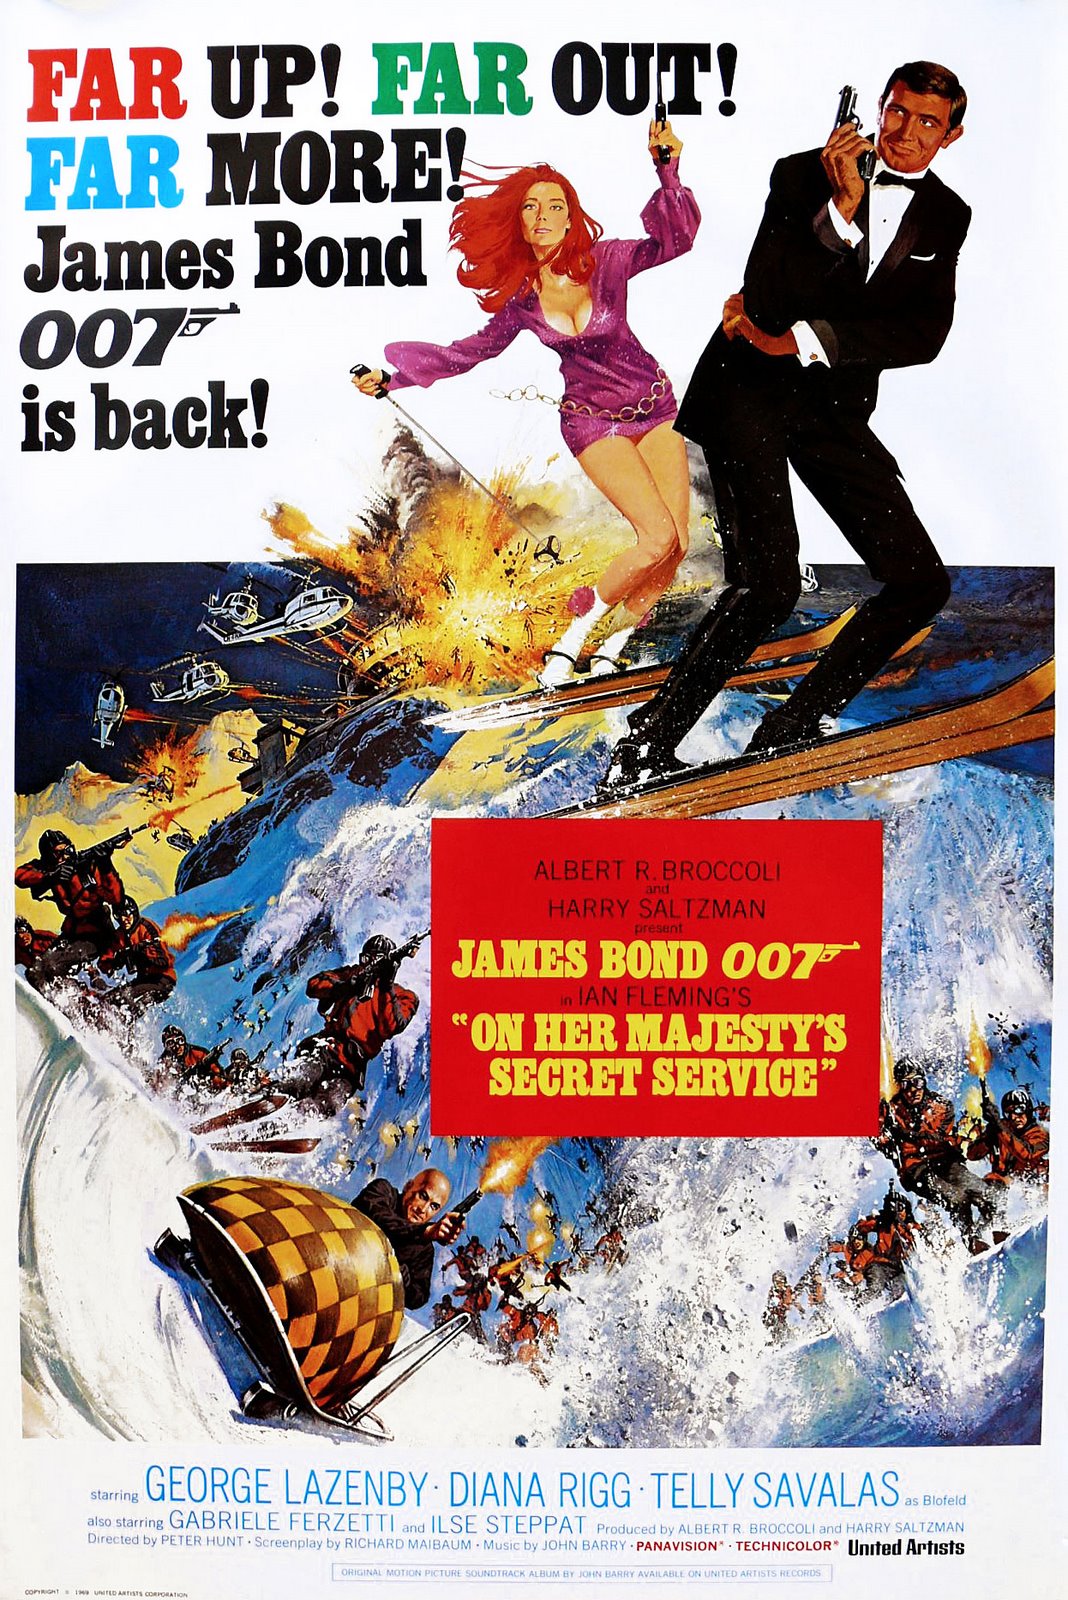 Welcome To Rolexmagazine Com Home Of Jake S Rolex World Magazine Optimized For Ipad And Iphone Chapter 5 George Lazenby On Her Majesty S Secret Service